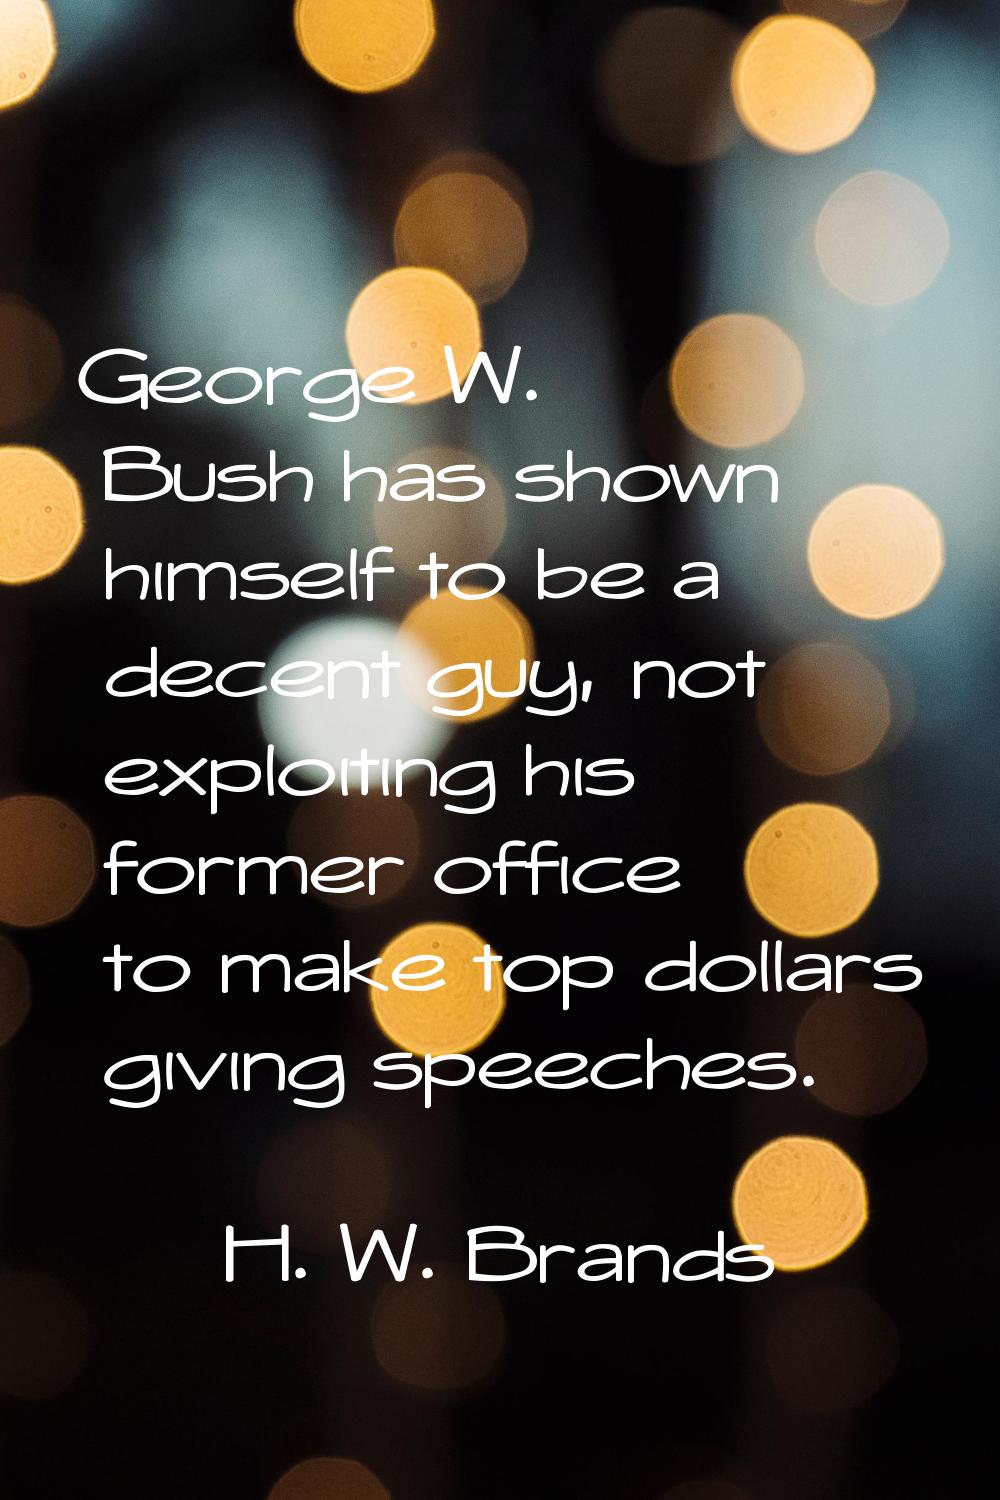 George W. Bush has shown himself to be a decent guy, not exploiting his former office to make top d